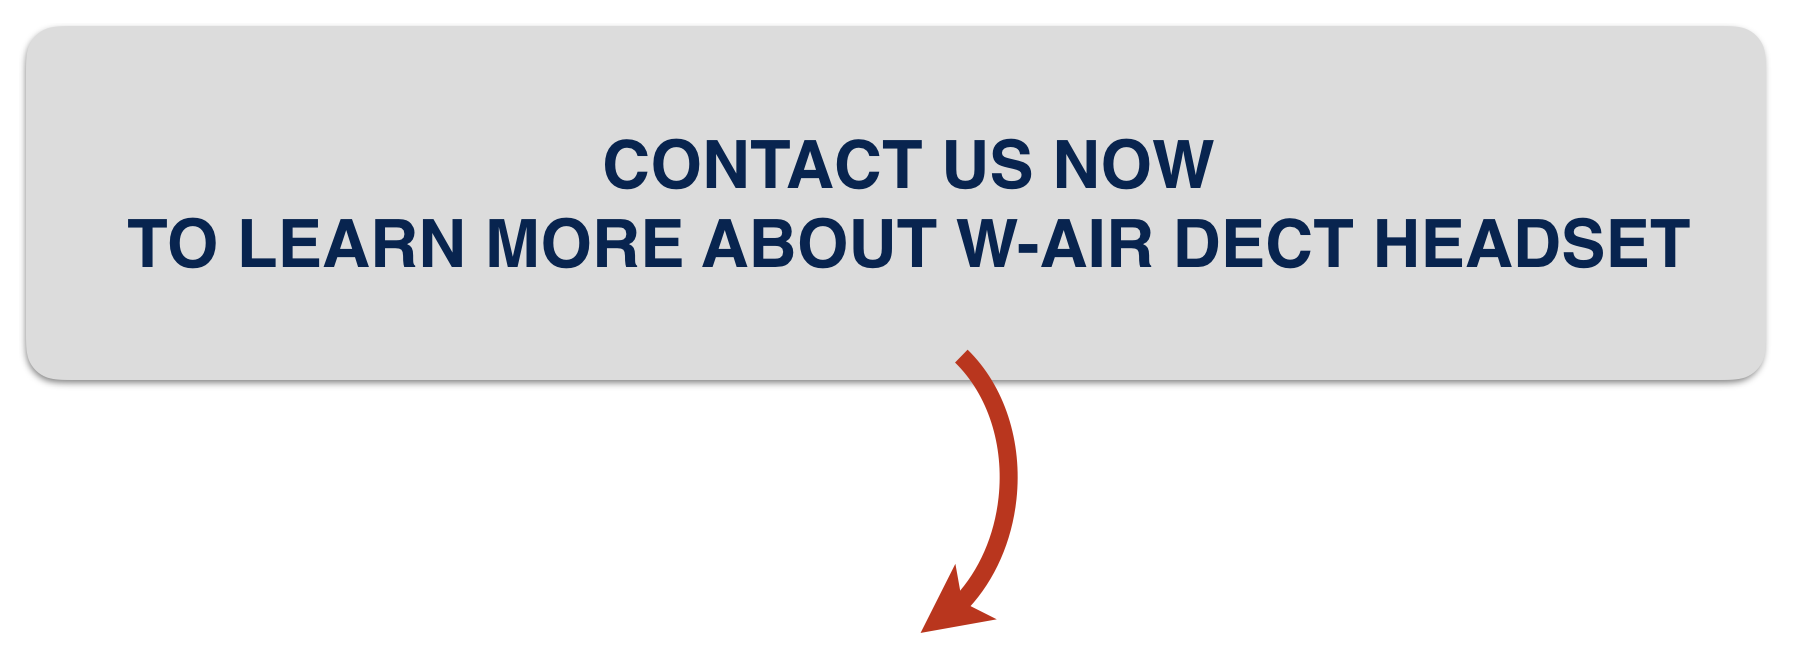 Contact us now to learn more about W-AIR DECT Headset